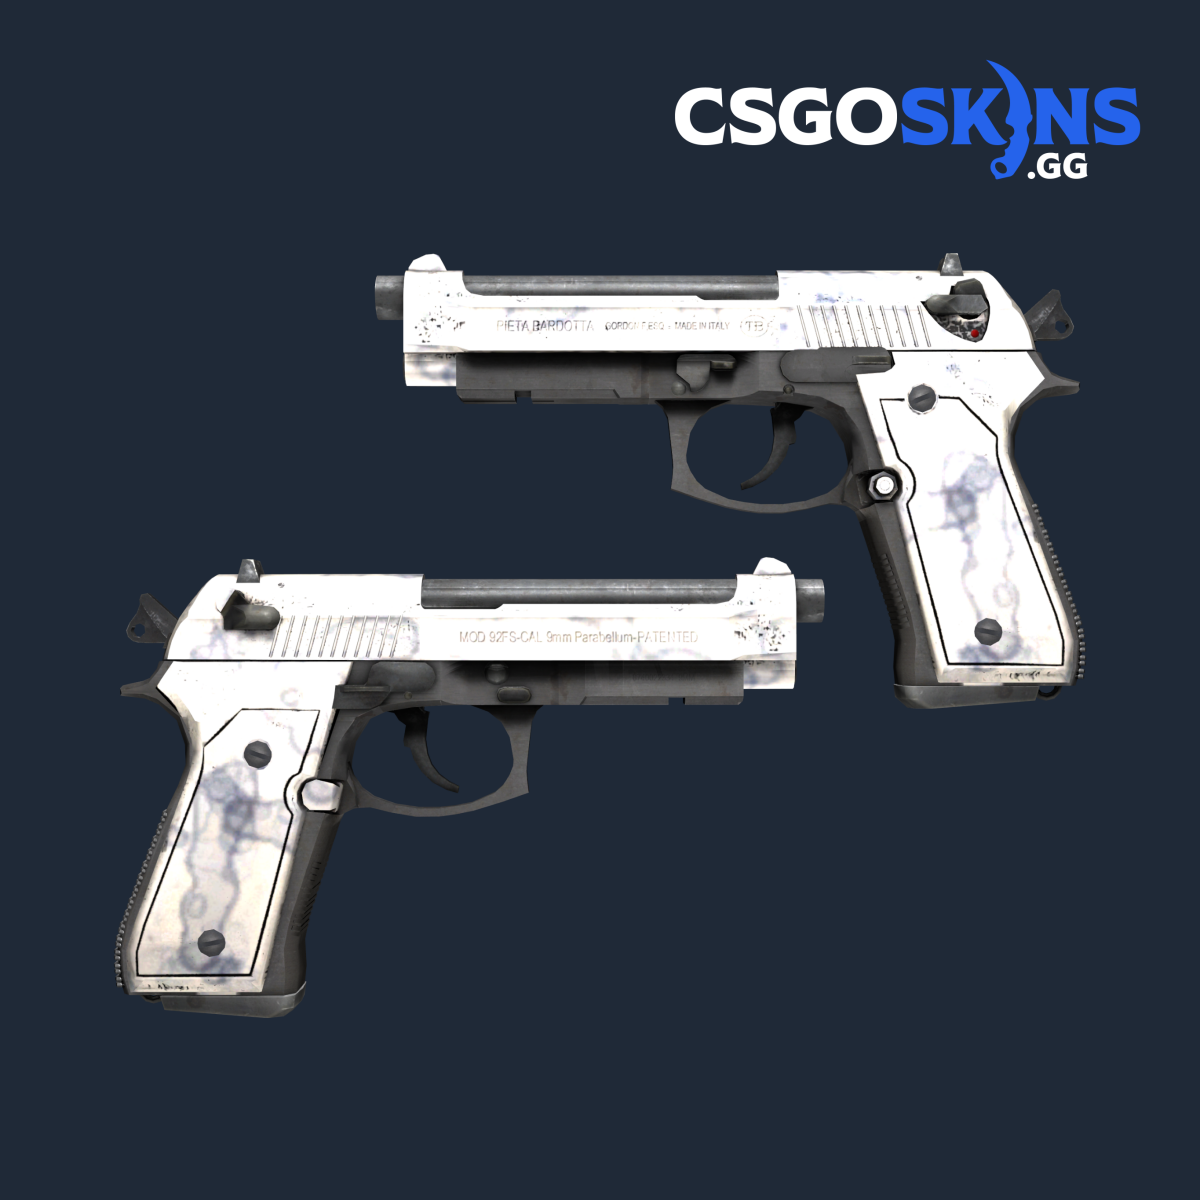 Dual Berettas Stained cs go skin download the new for mac